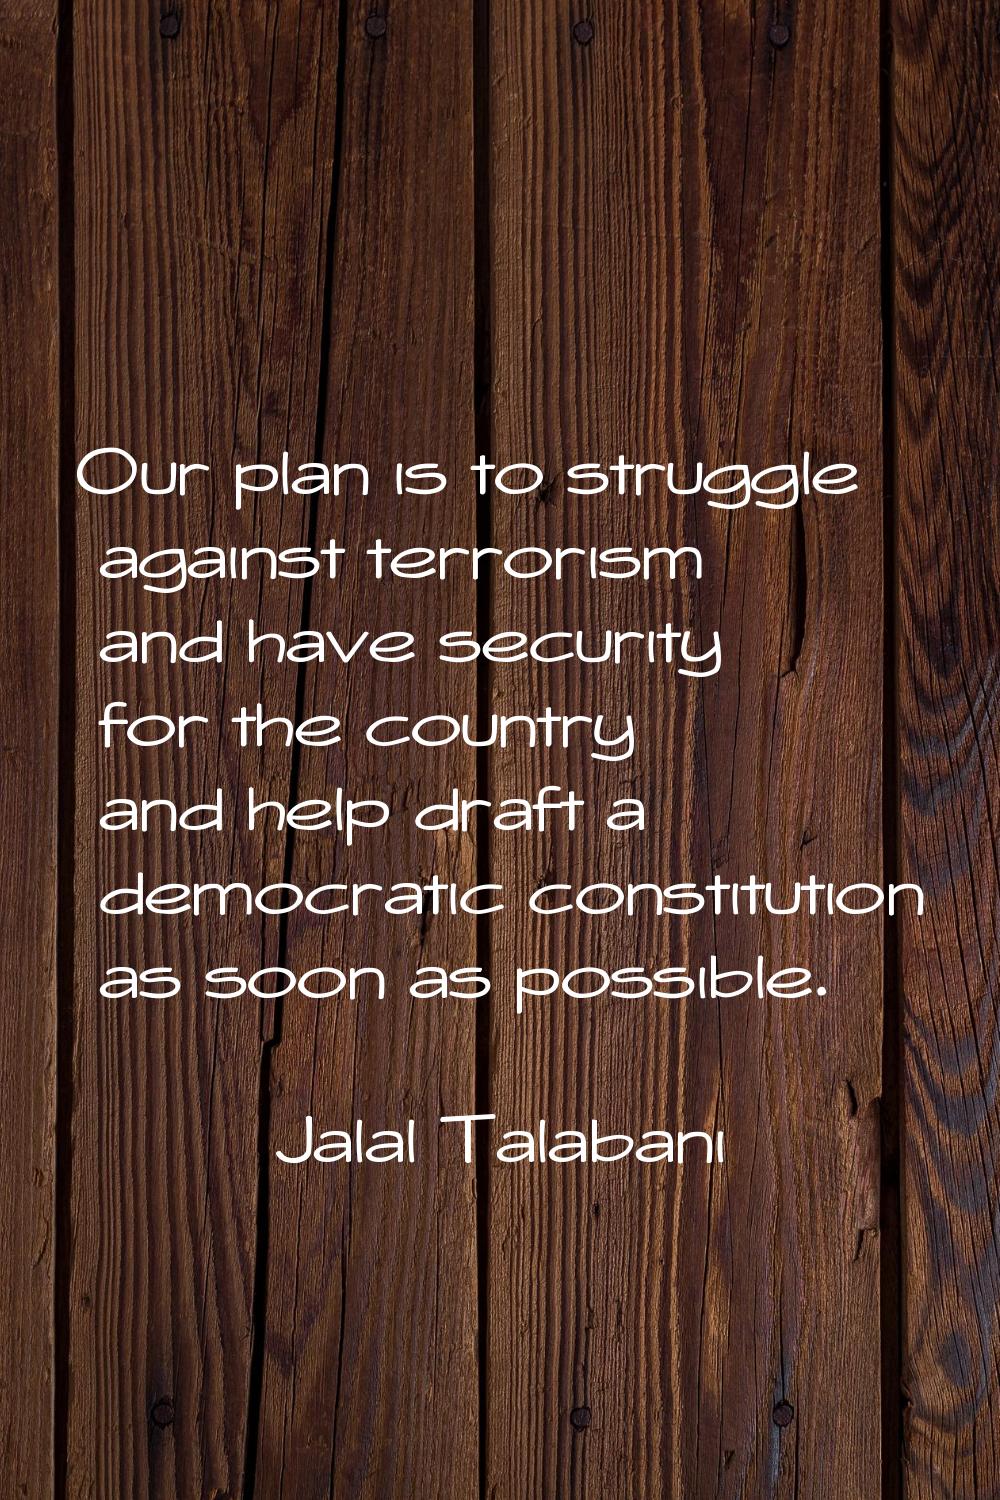 Our plan is to struggle against terrorism and have security for the country and help draft a democr